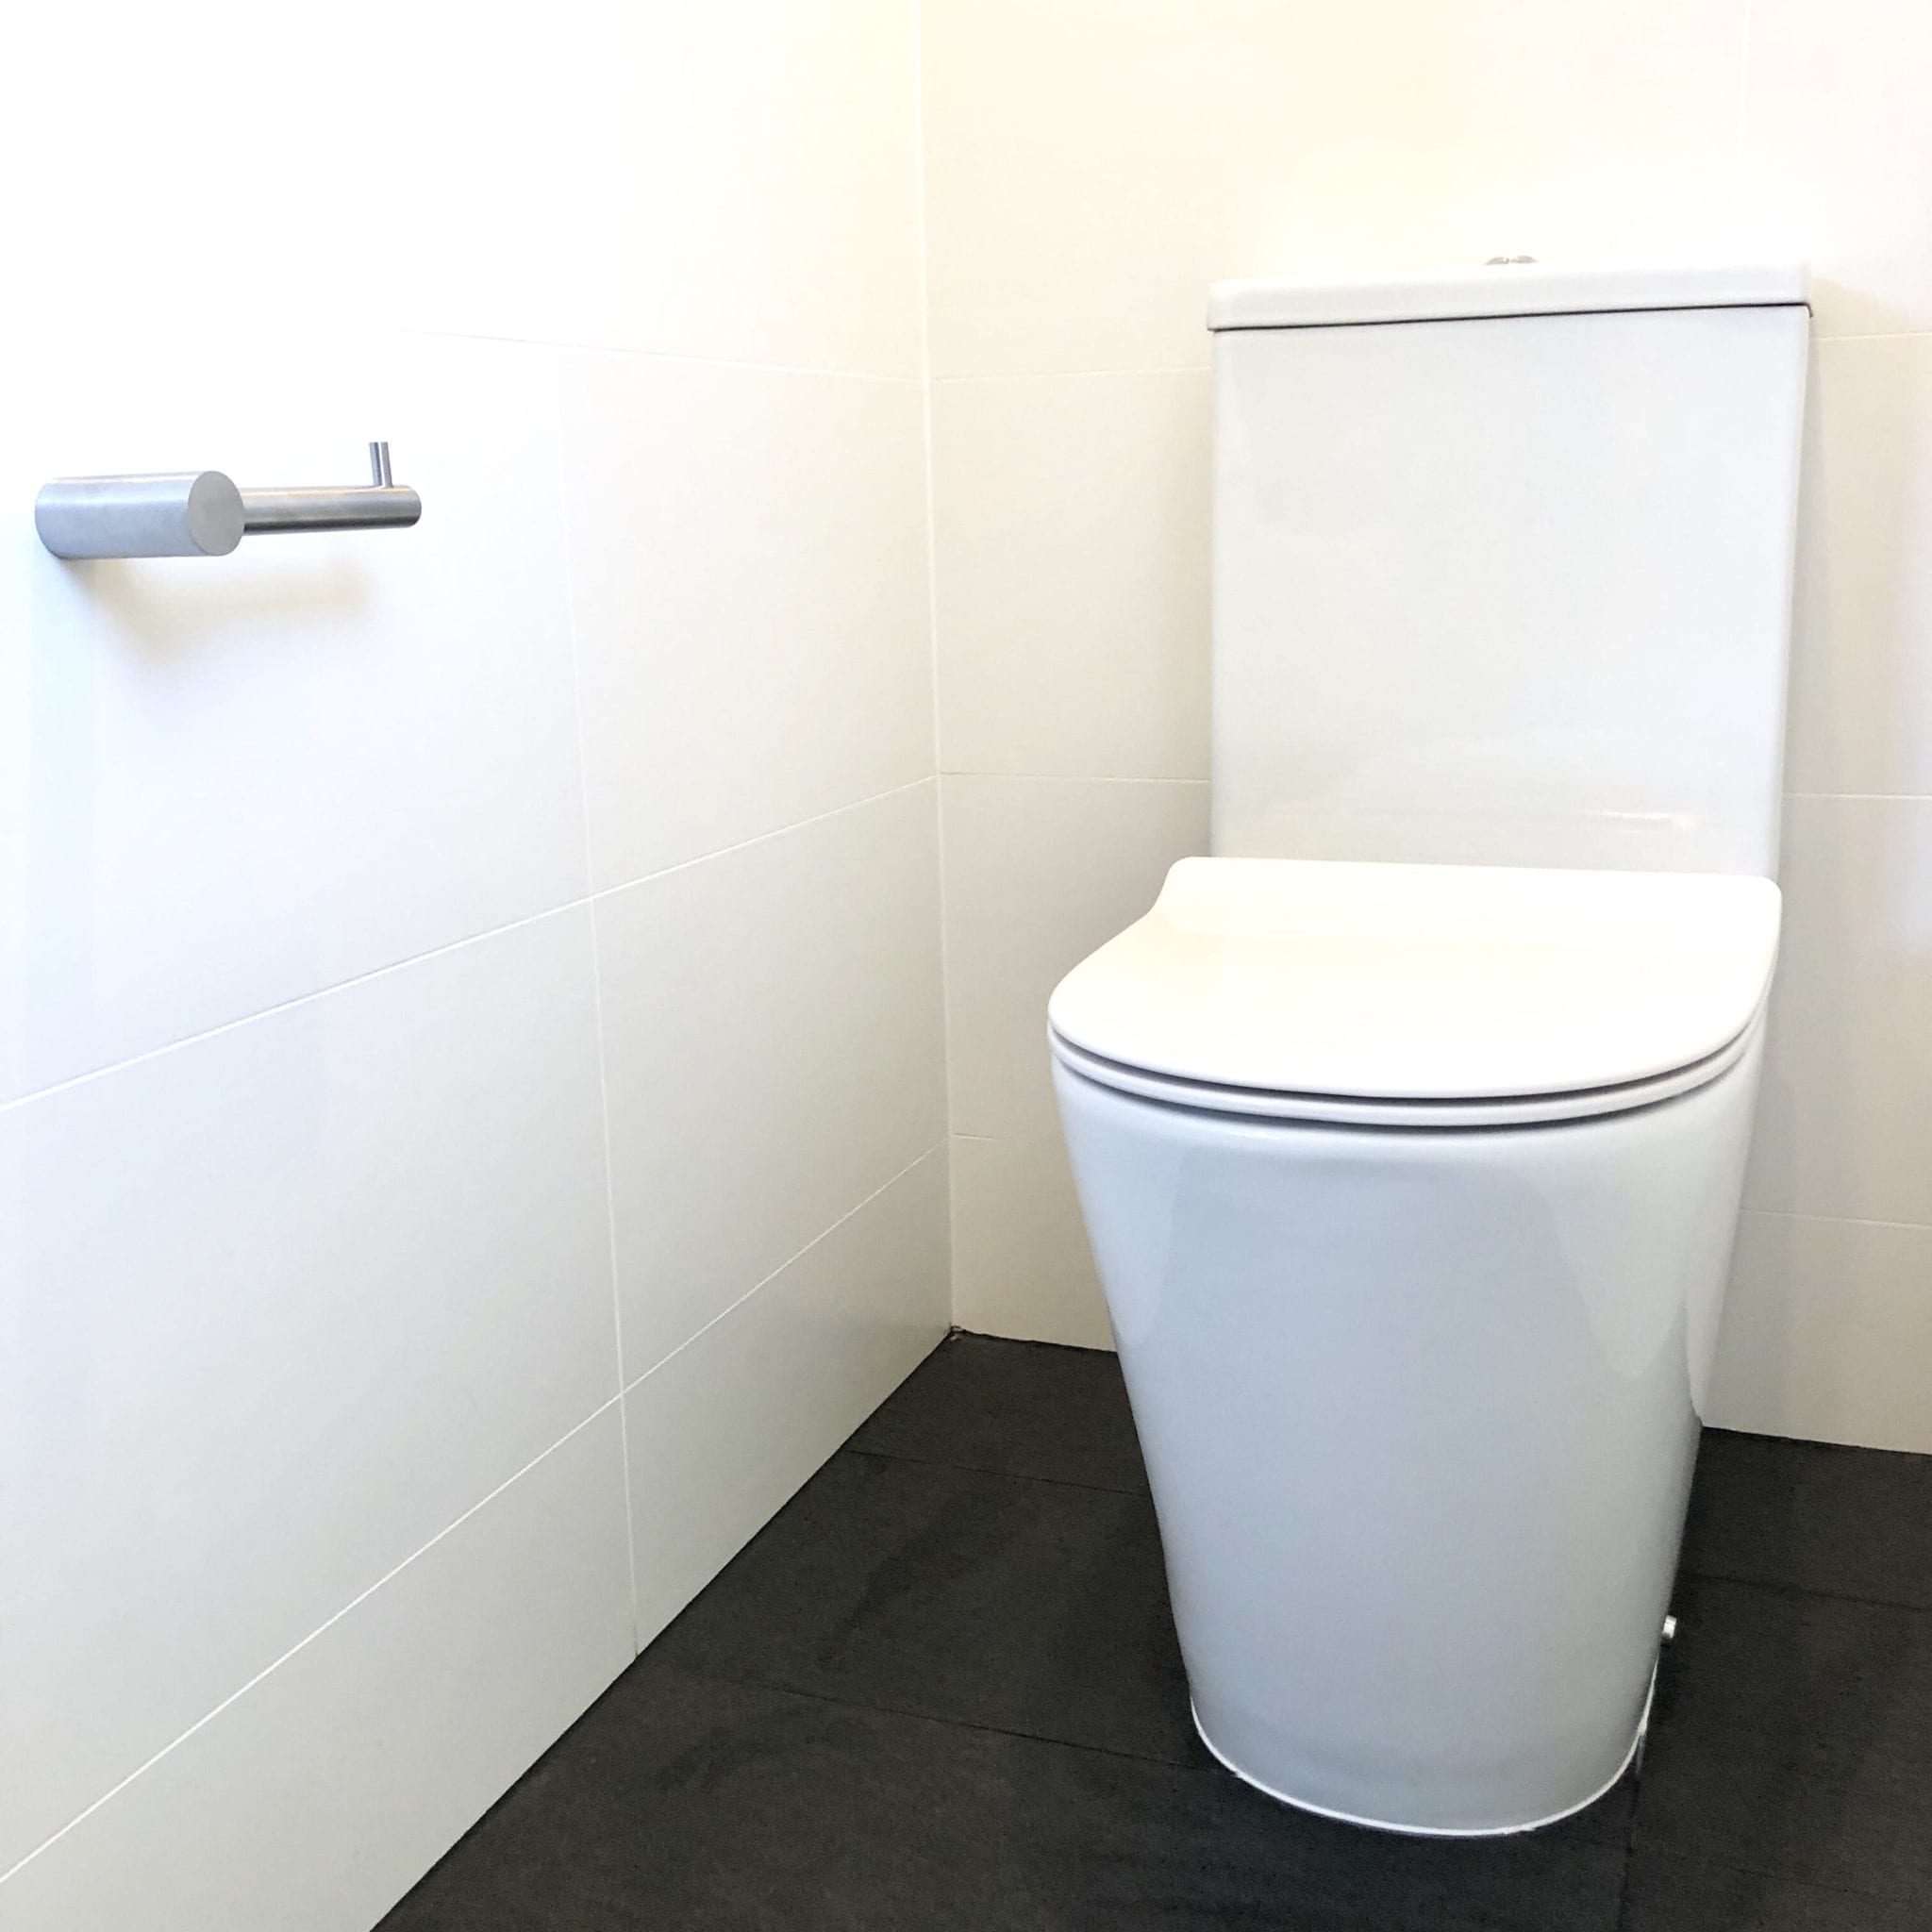 A new white toilet installed in a modern bathroom. | Featured Image for the Signs of a Clogged Sewer Line Blog Article from Akins Plumbing.